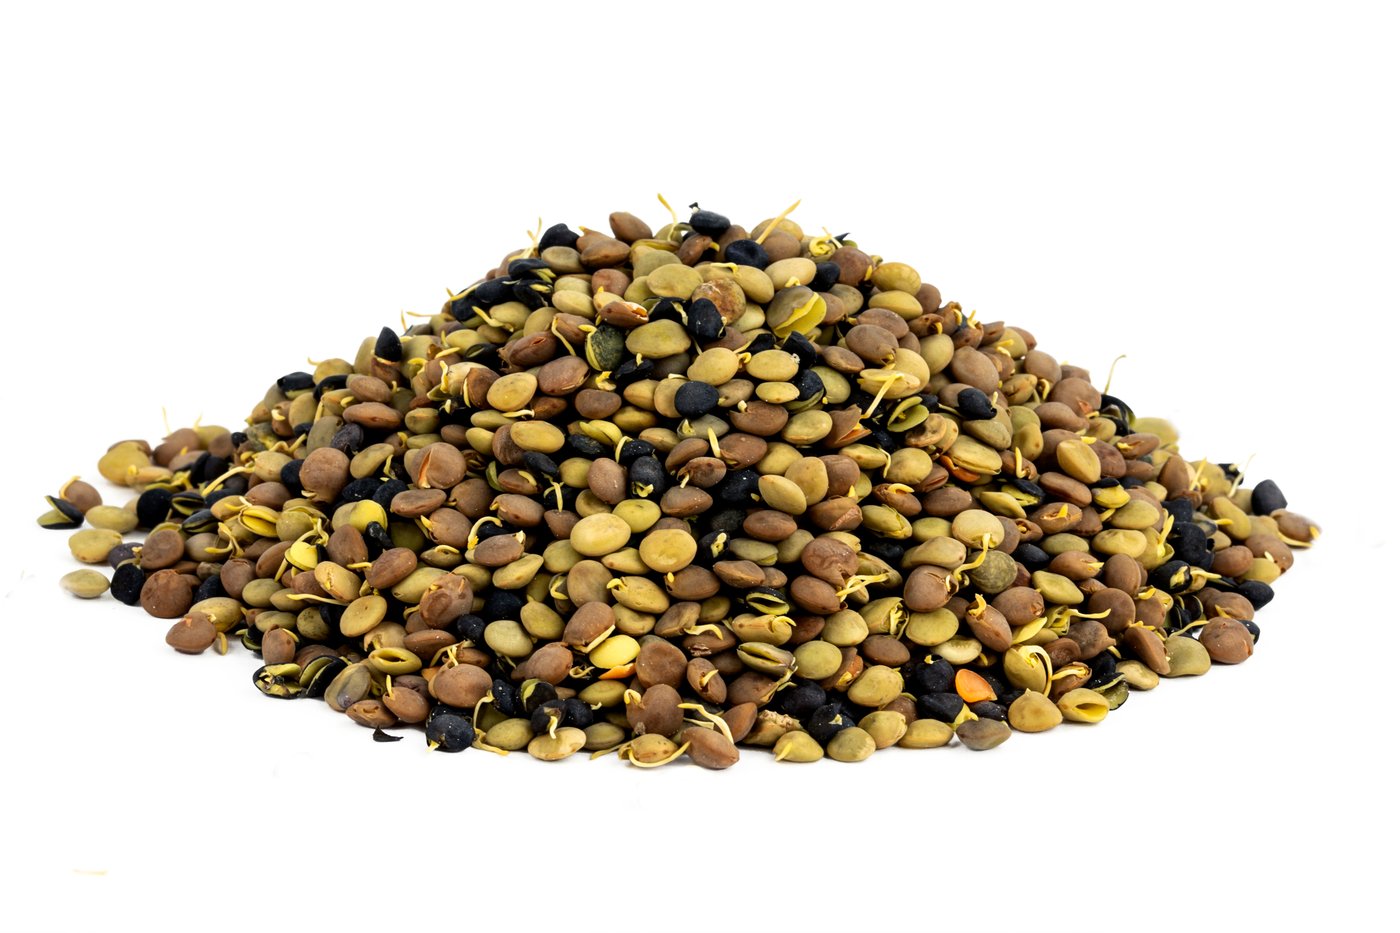 Organic Sprouted Lentil Blend image zoom